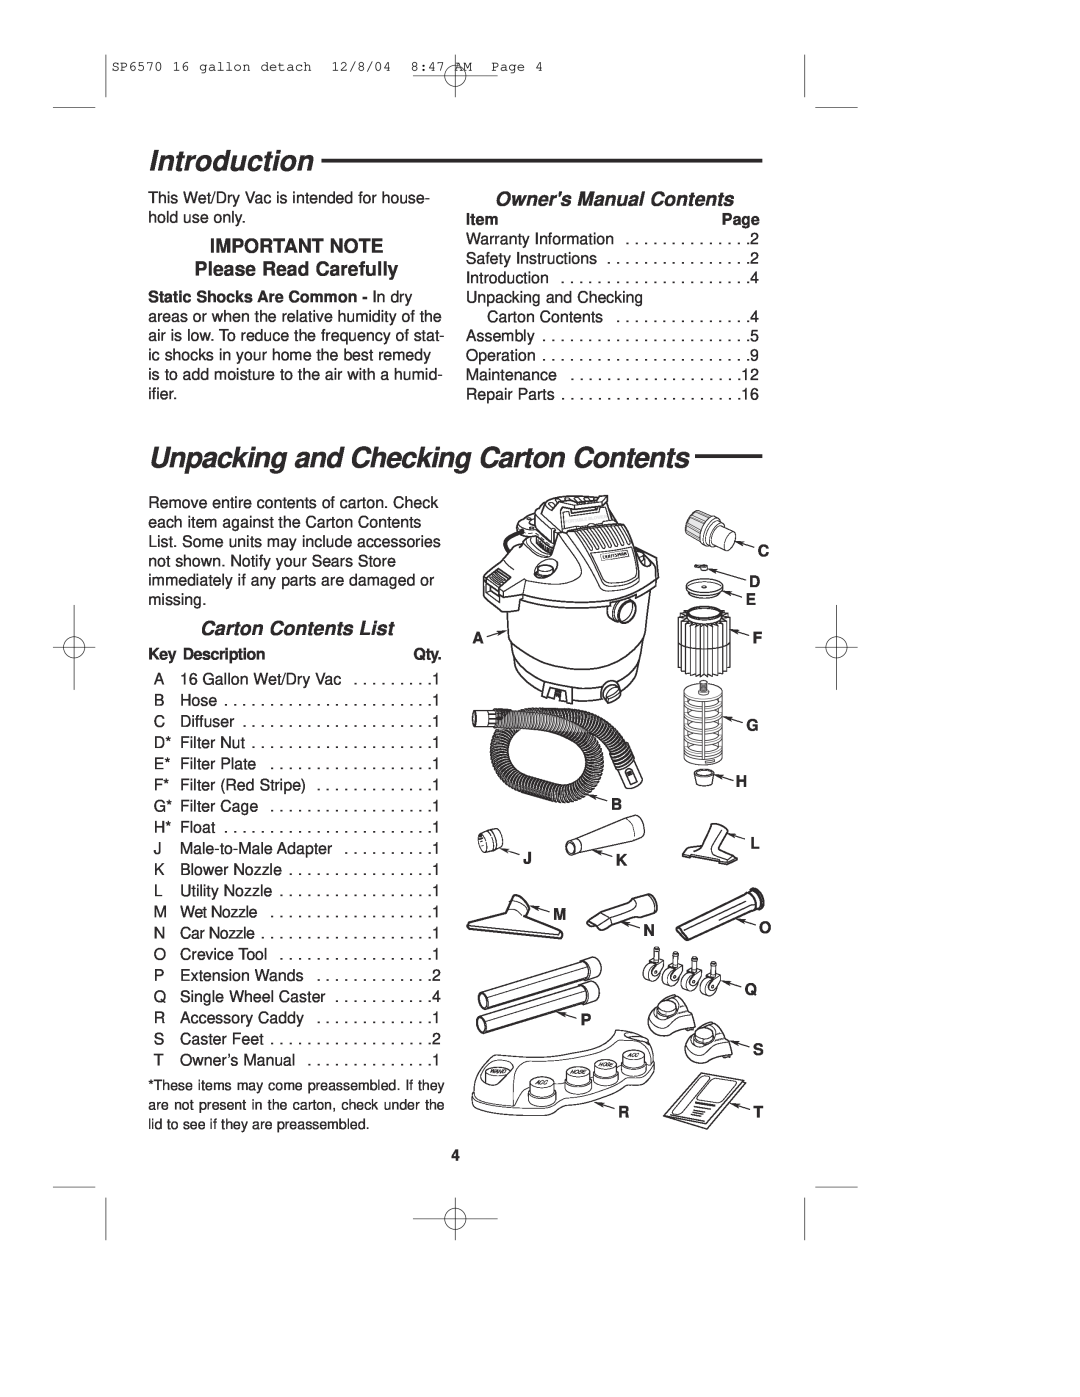 Sears 113.17066 owner manual Introduction, Unpacking and Checking Carton Contents, IMPORTANT NOTE Please Read Carefully 